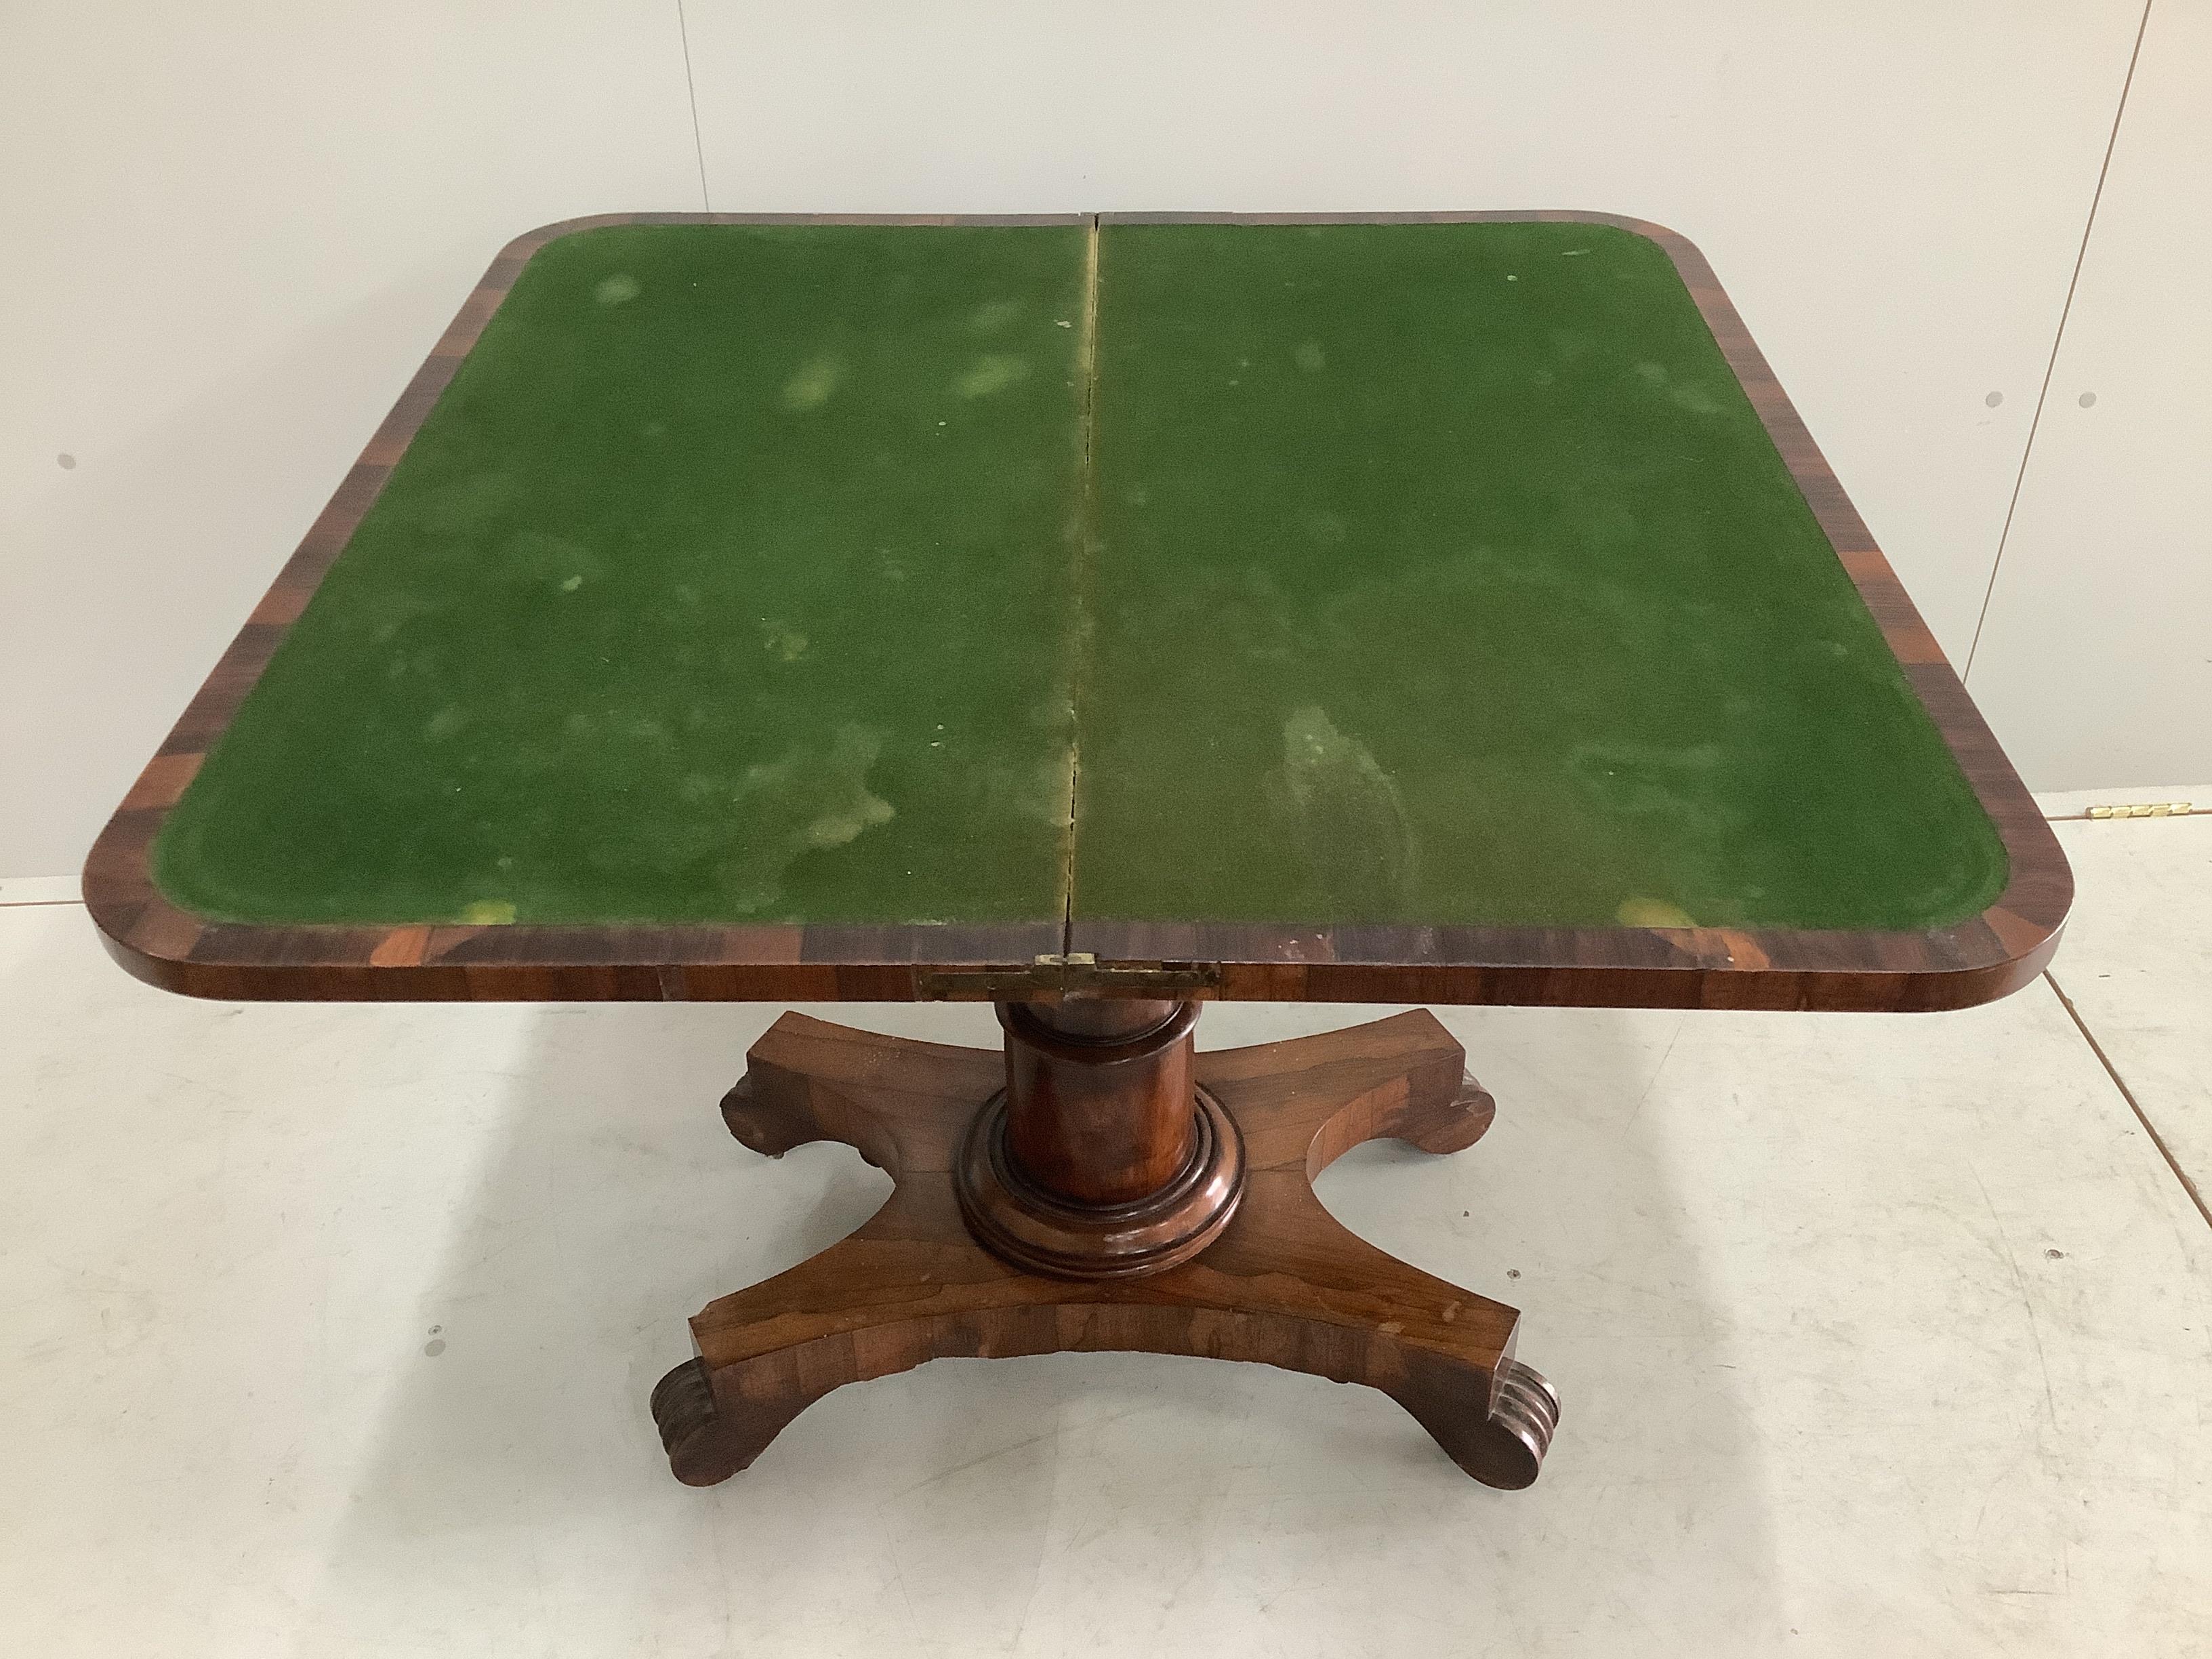 An early Victorian rectangular rosewood folding card table, width 90cm, depth 44cm, height 75cm. Condition - poor